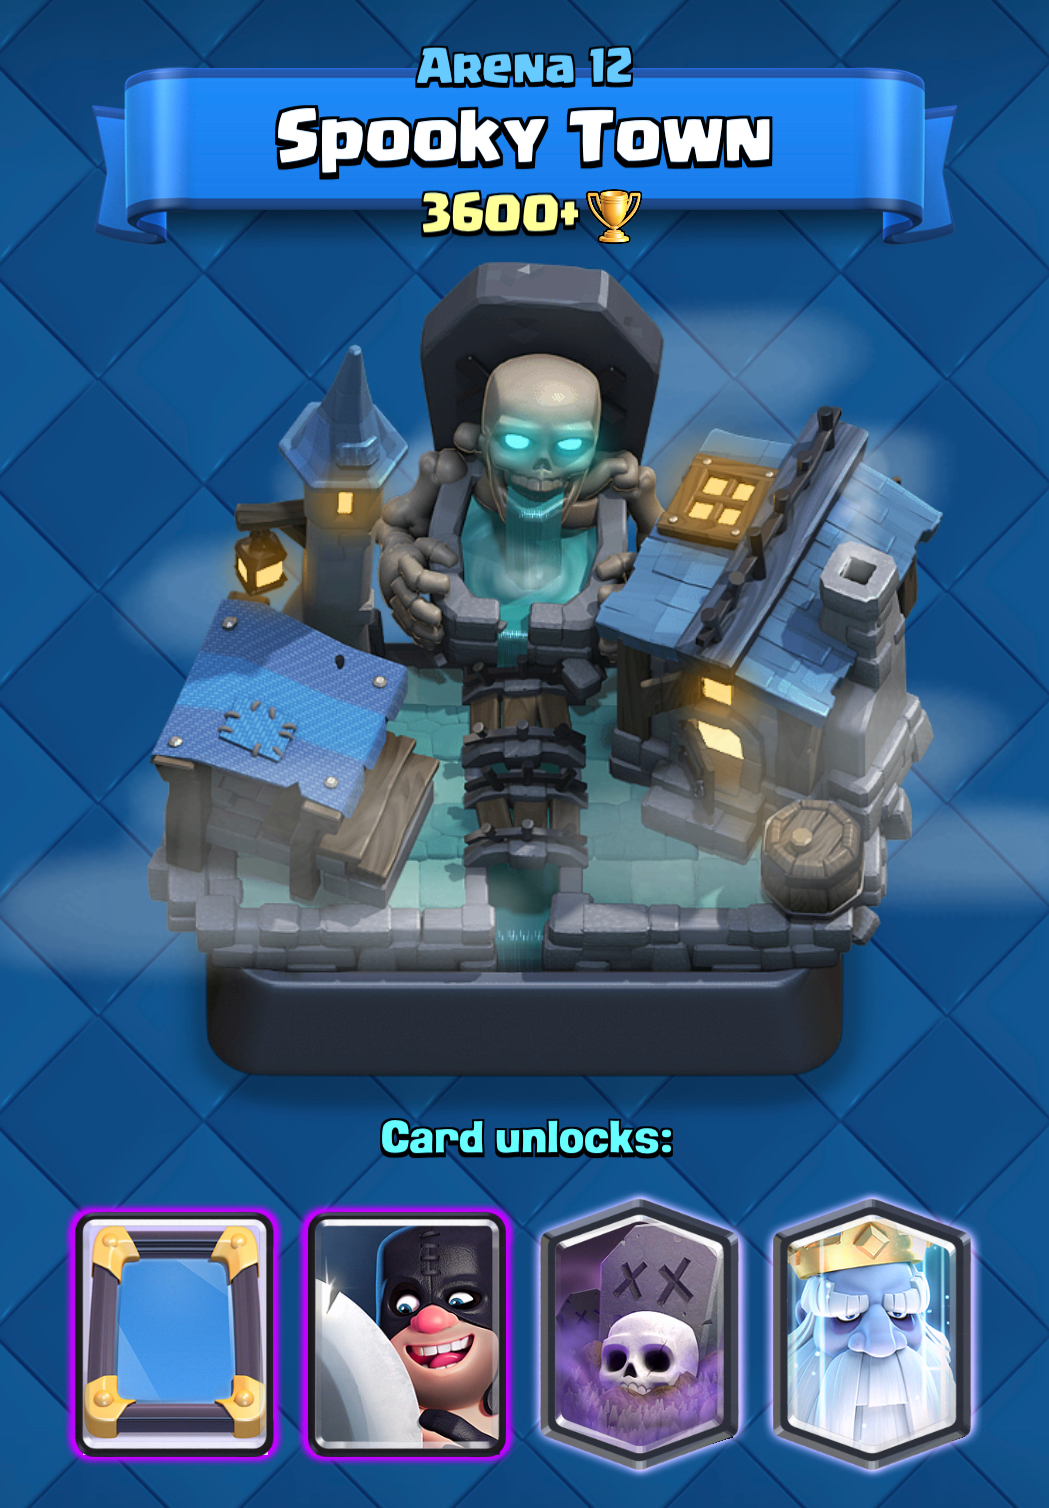 unlocking cards in clash royale